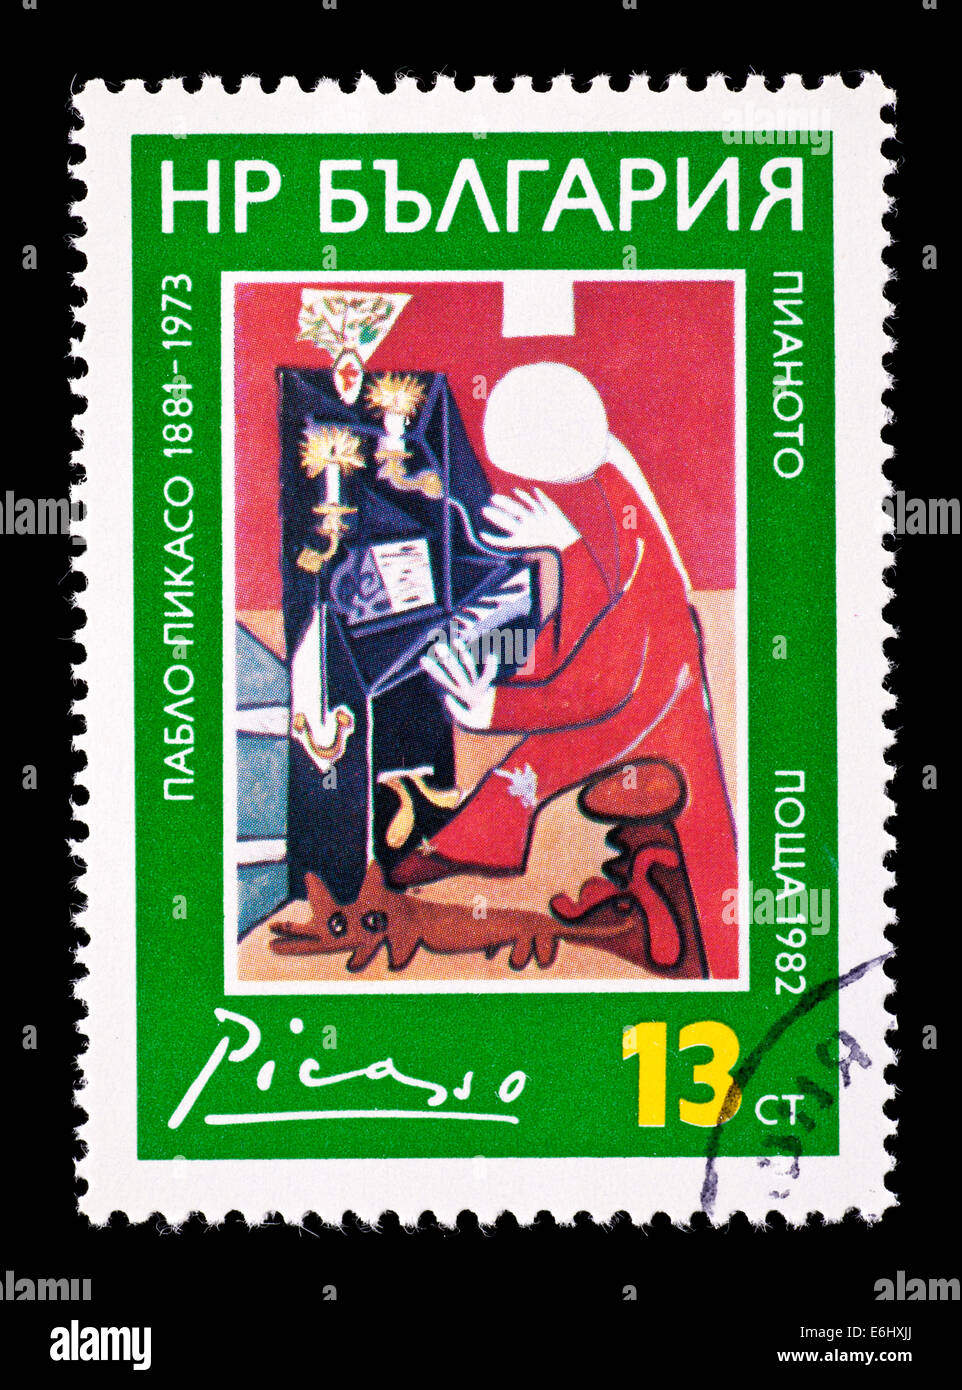 Postage stamp from Bulgaria depicting the Pablo Picasso painting "The Piano  Stock Photo - Alamy